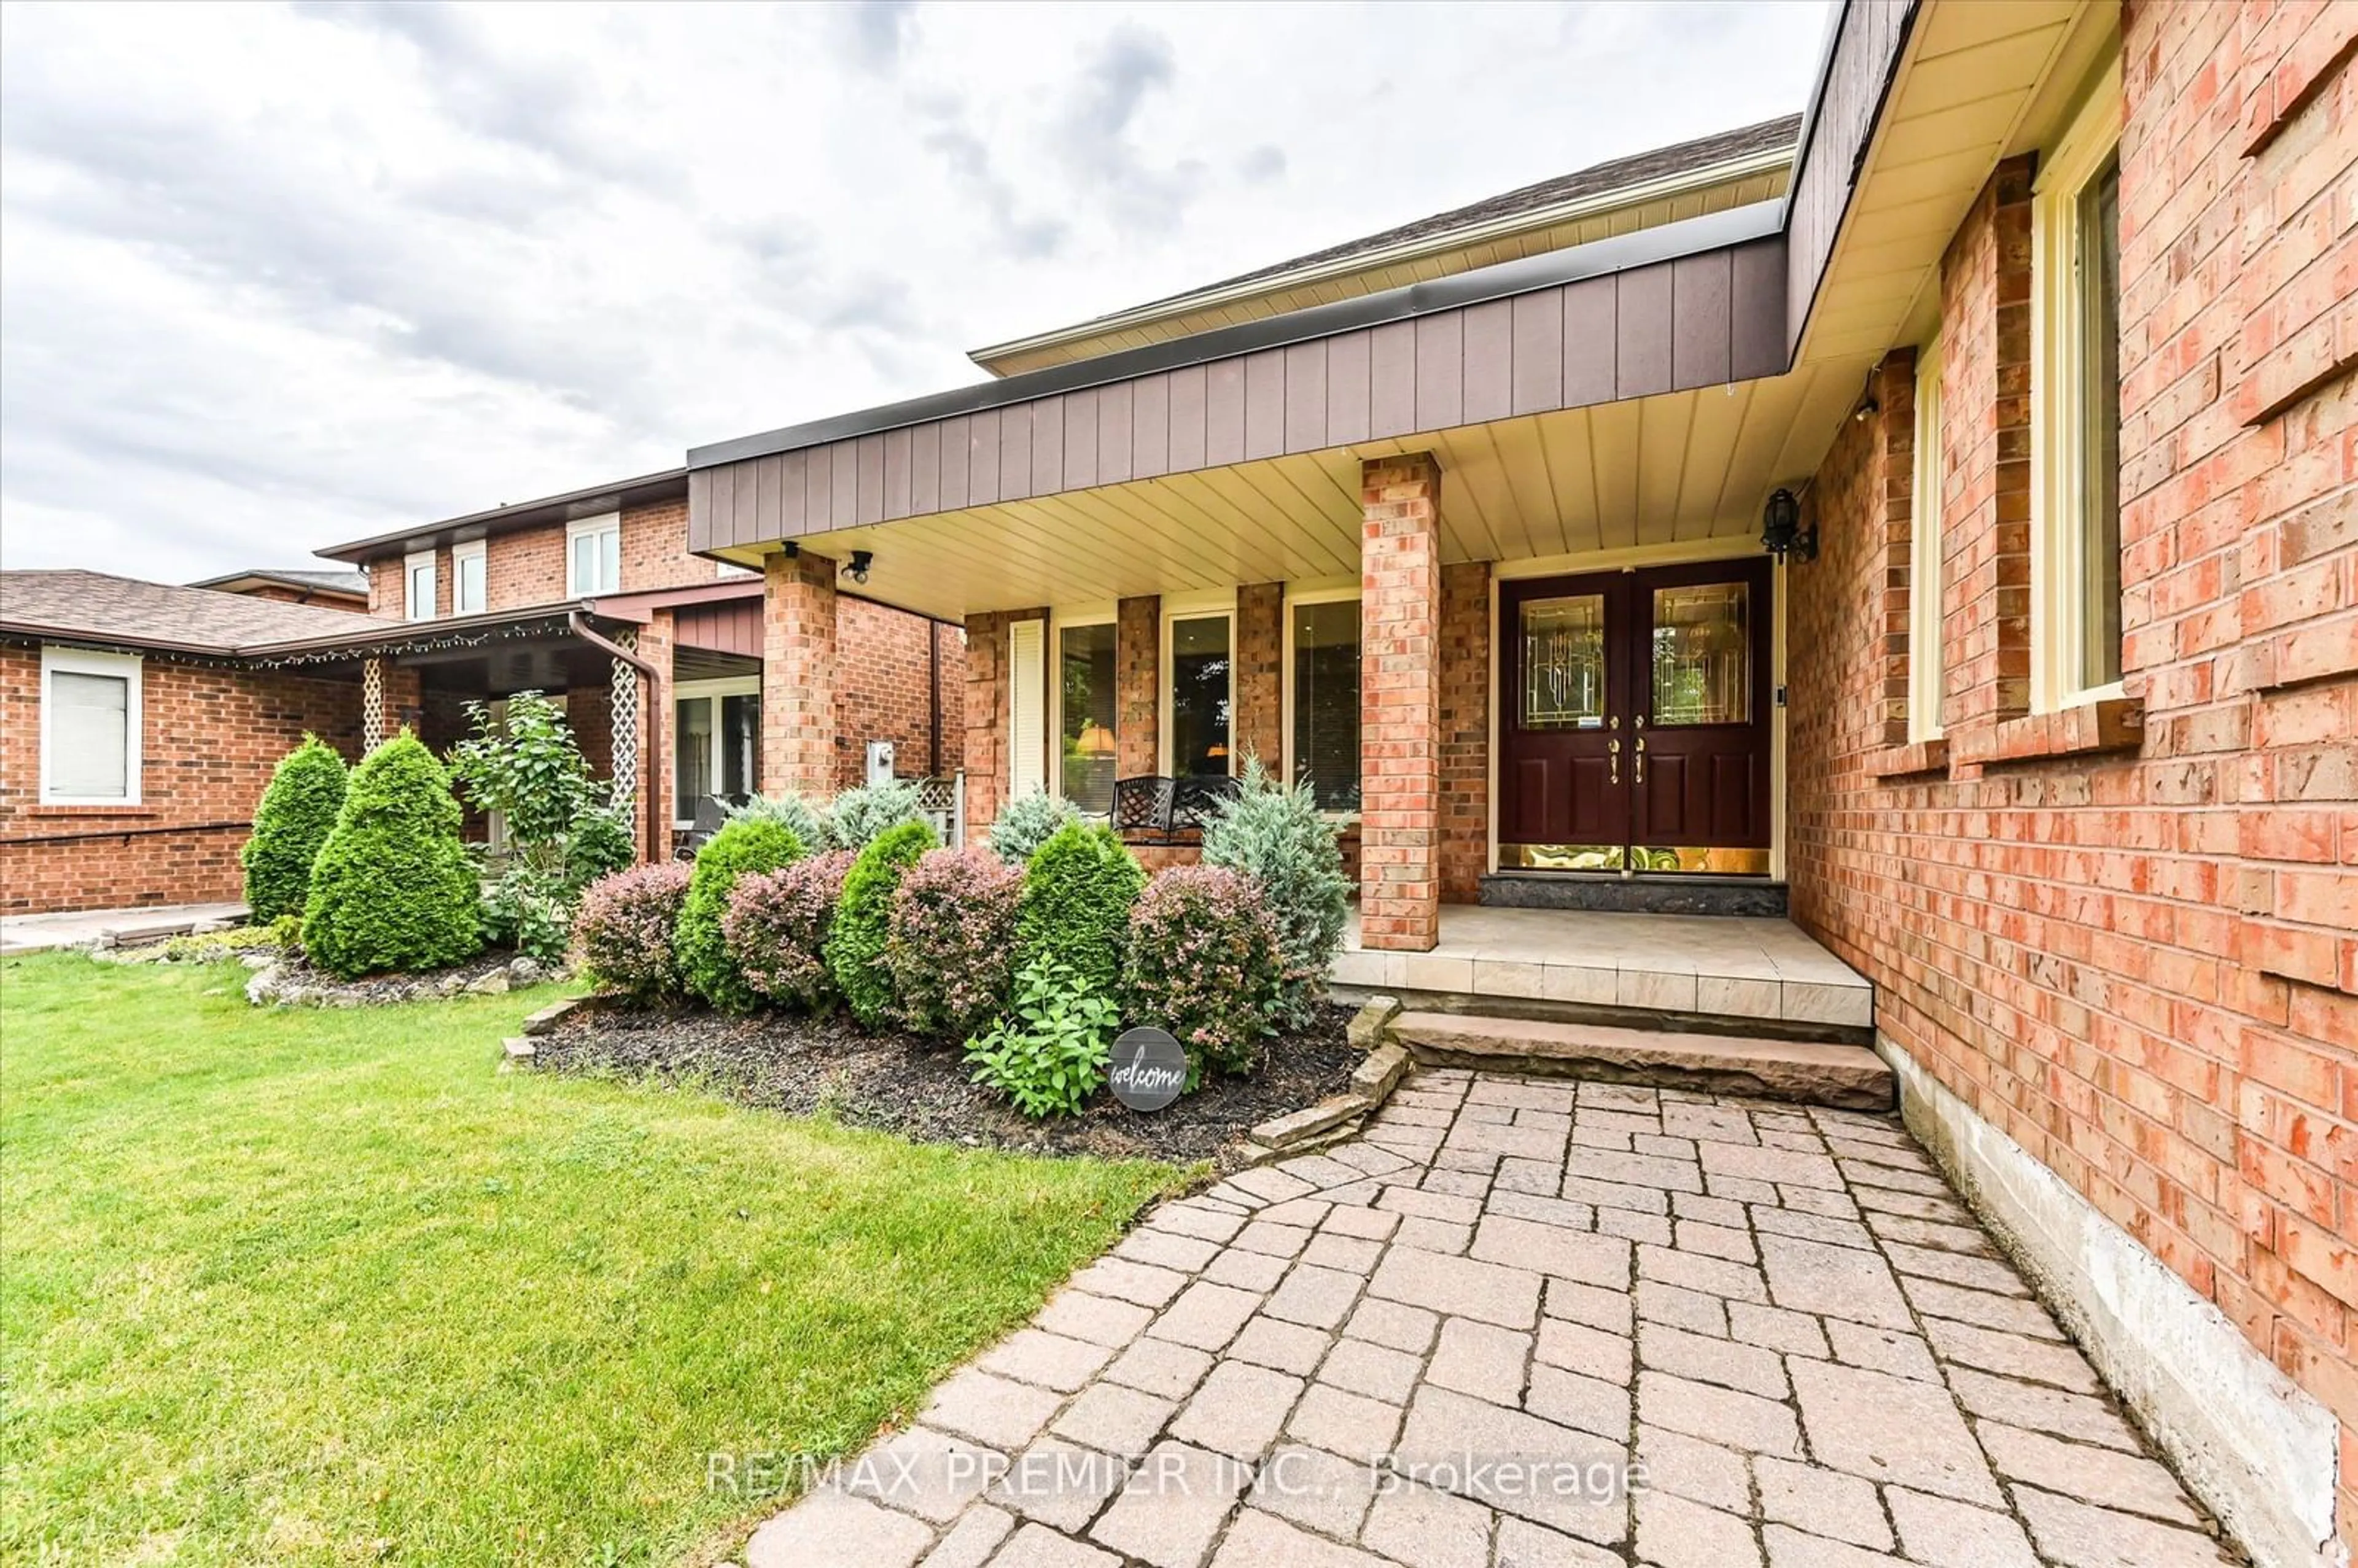 Home with brick exterior material for 252 Triton Ave, Vaughan Ontario L4L 6R1